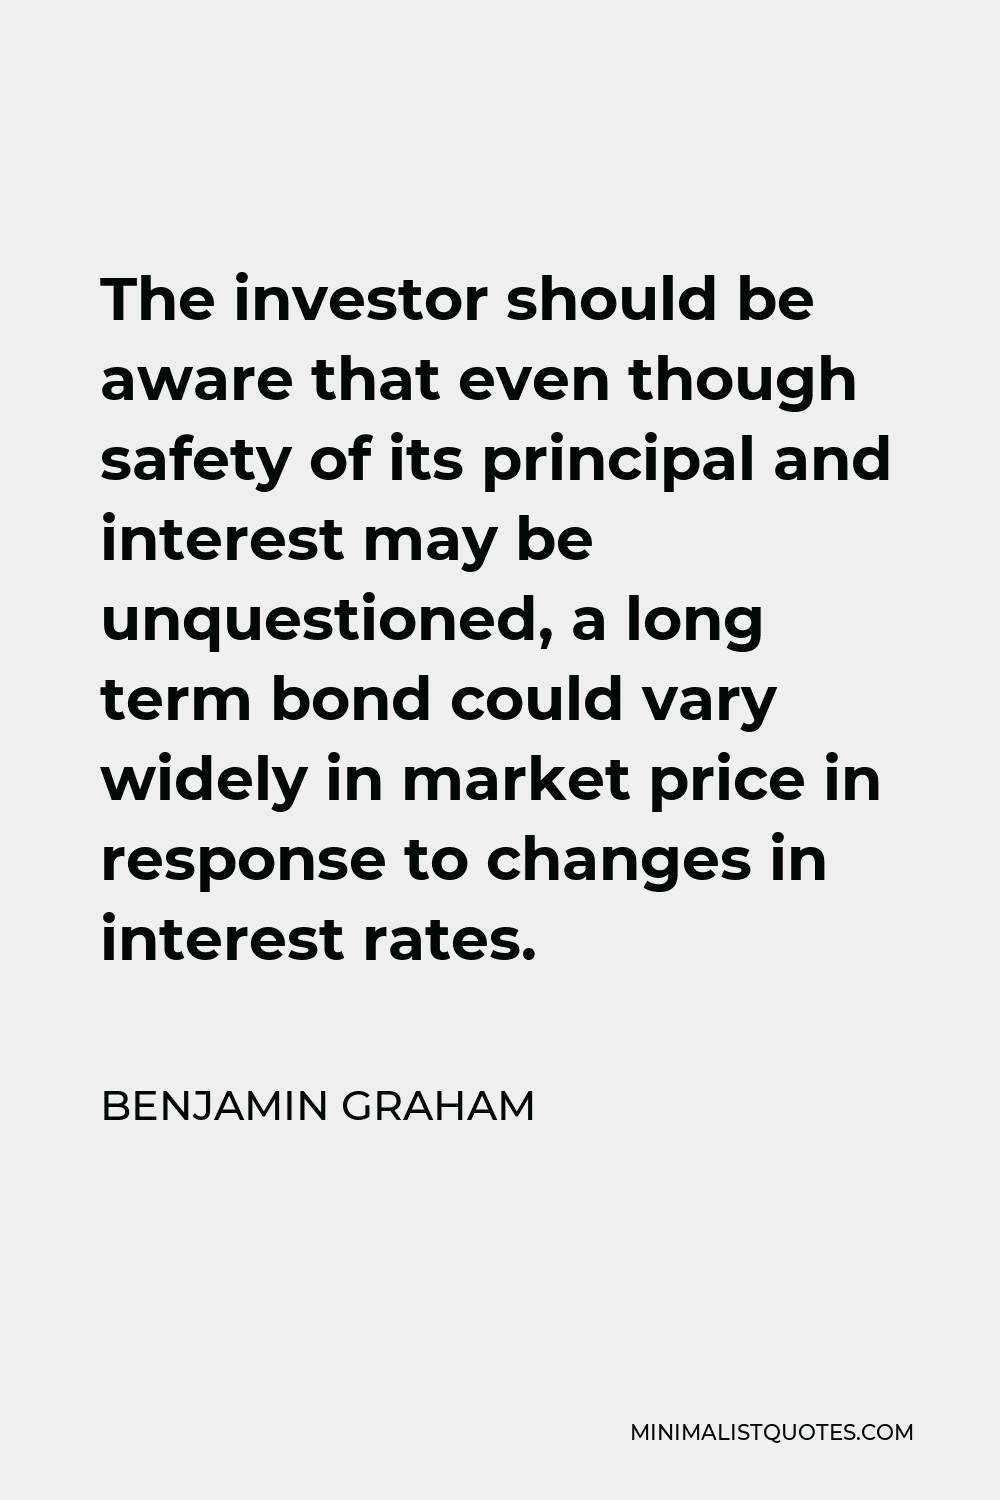 Benjamin Graham Quote - The investor should be aware that even though safety of its principal and interest may be unquestioned, a long term bond could vary widely in market price in response to changes in interest rates.